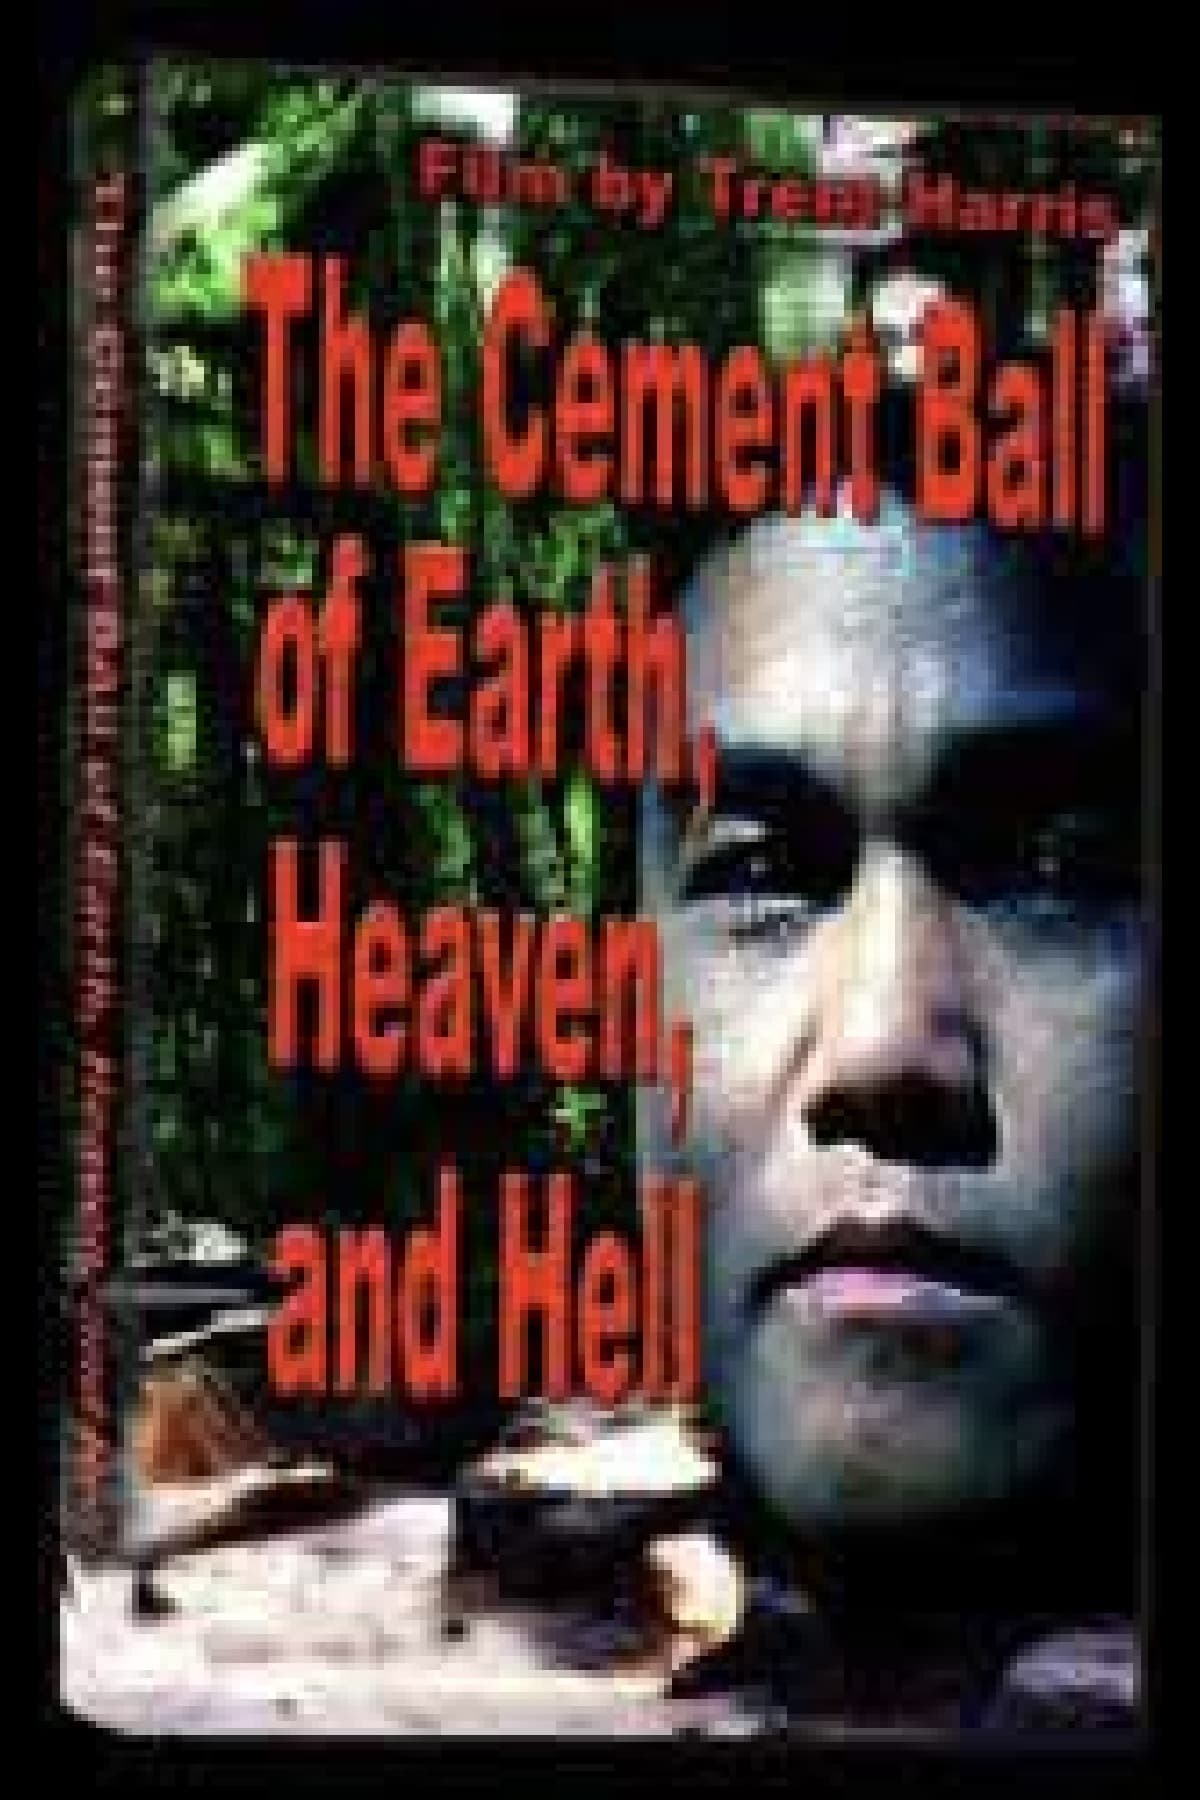 The Cement Ball of Earth, Heaven, And Hell